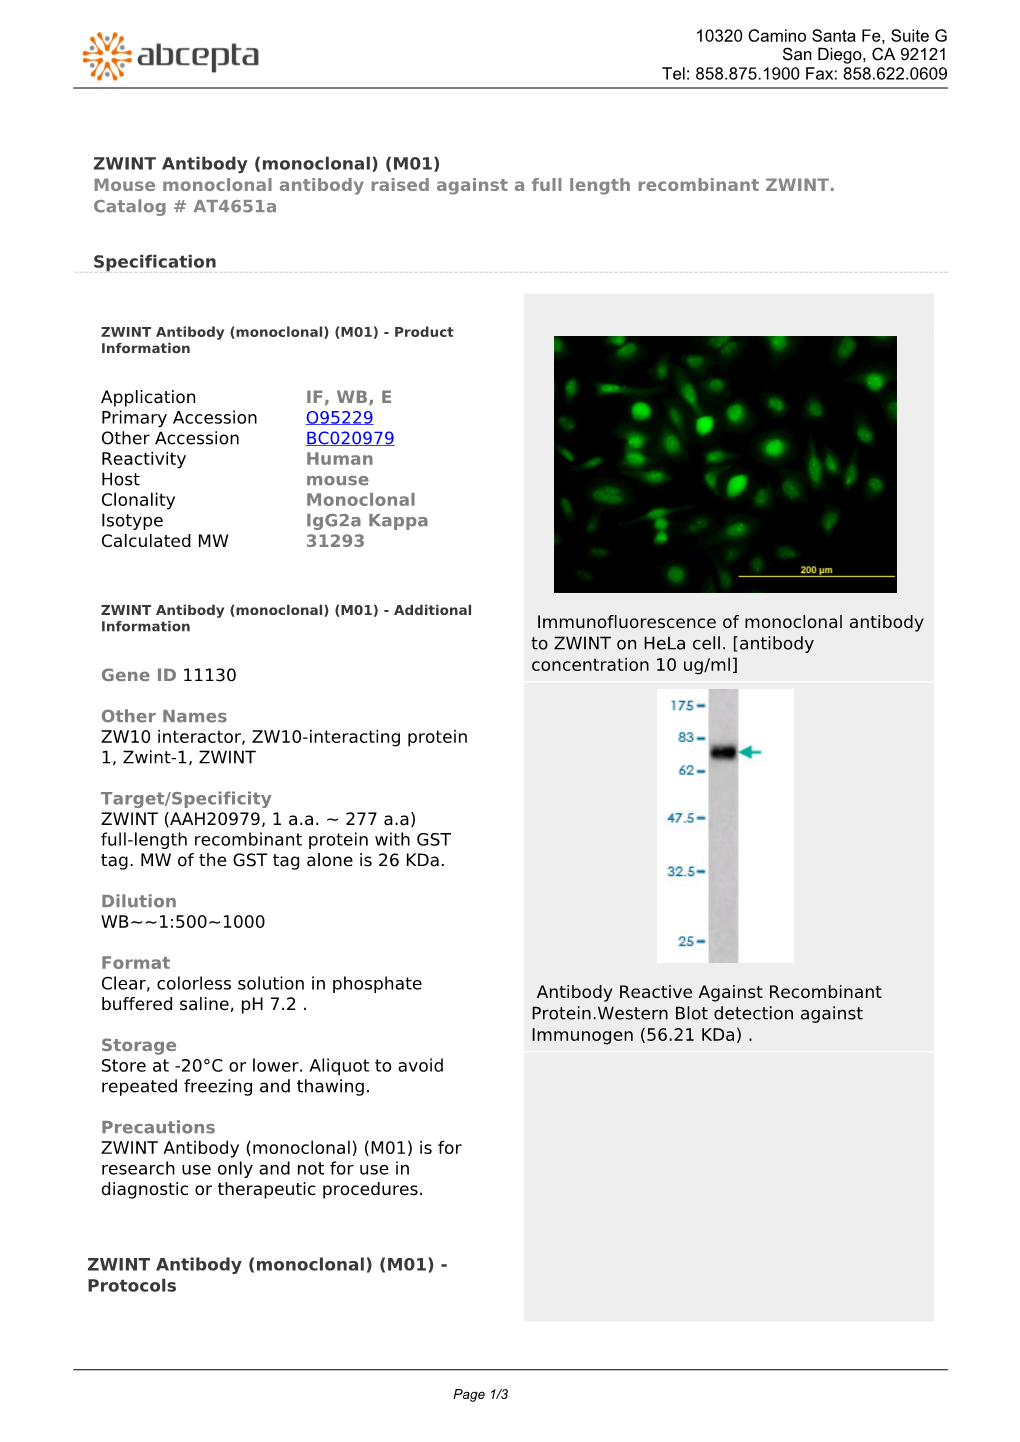 ZWINT Antibody (Monoclonal) (M01) Mouse Monoclonal Antibody Raised Against a Full Length Recombinant ZWINT